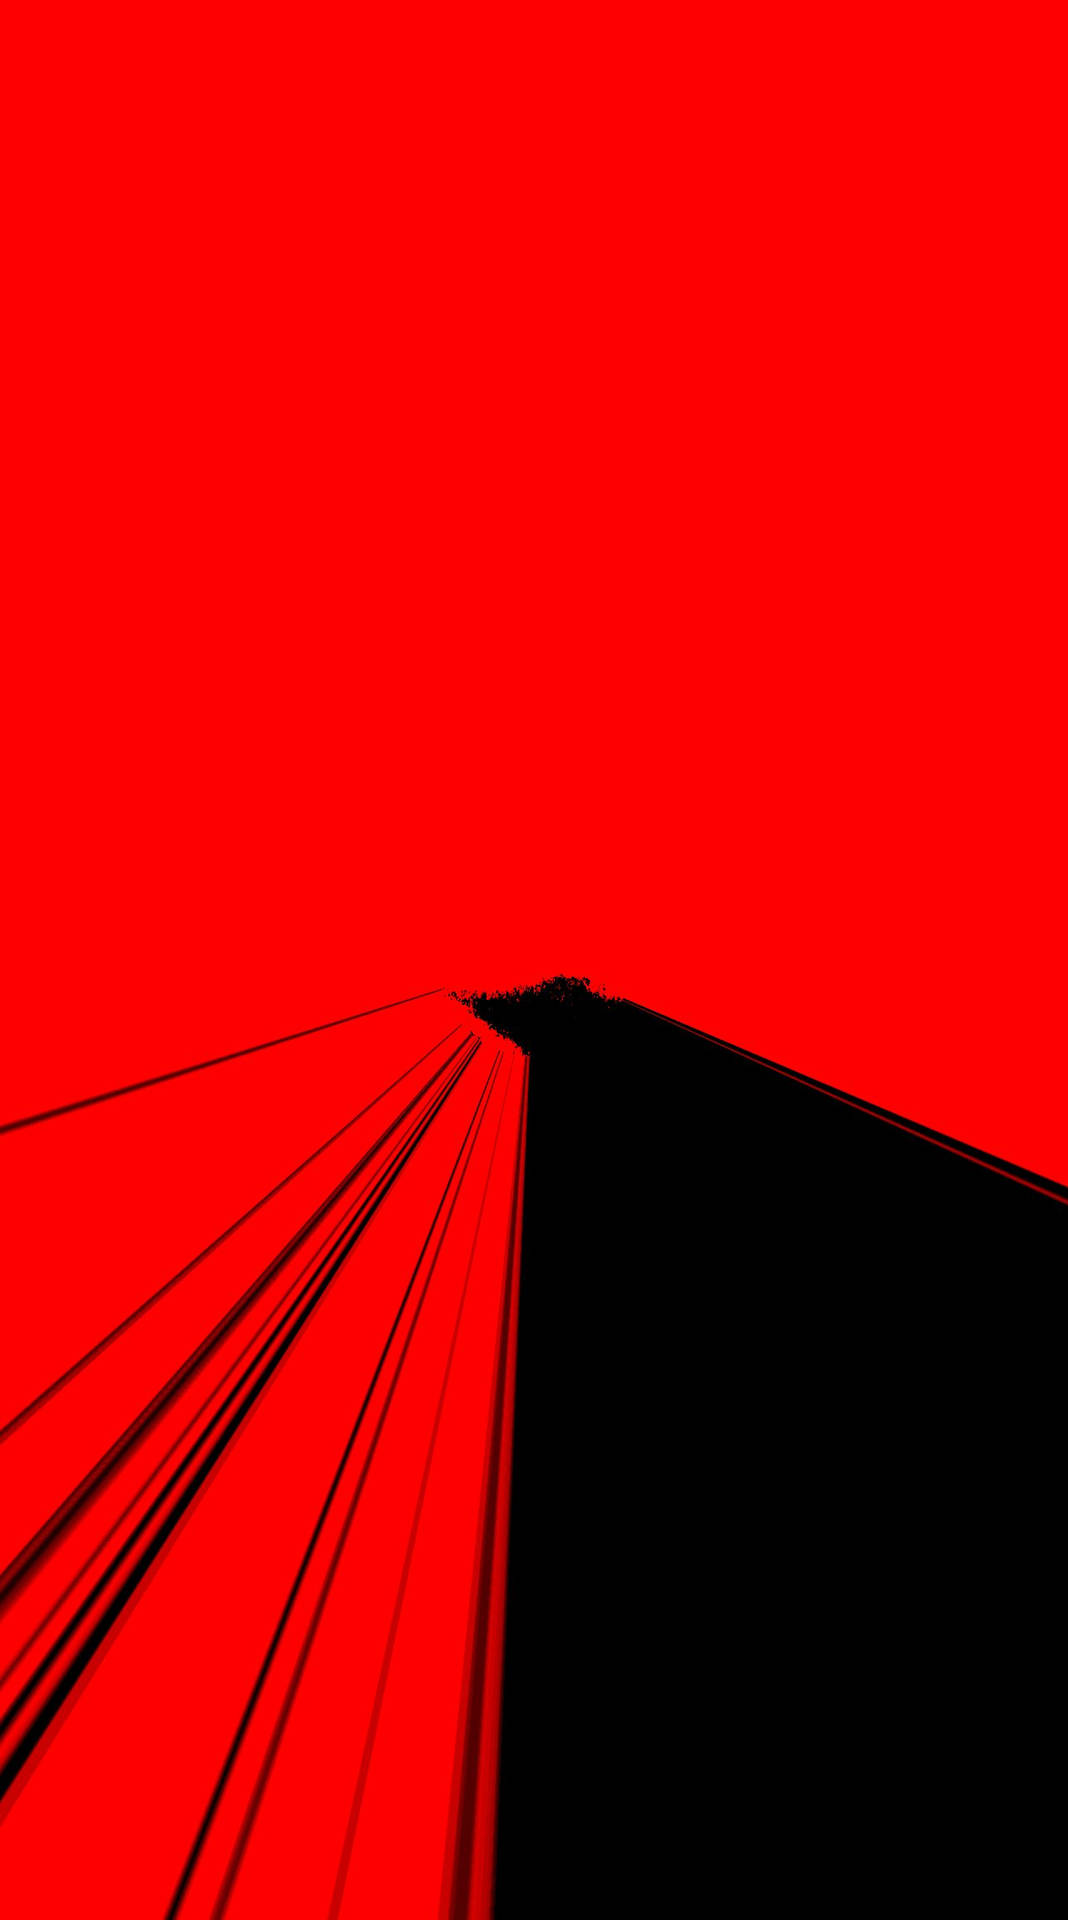 Flying along the scenic Red and Black Vaporwave Road Wallpaper